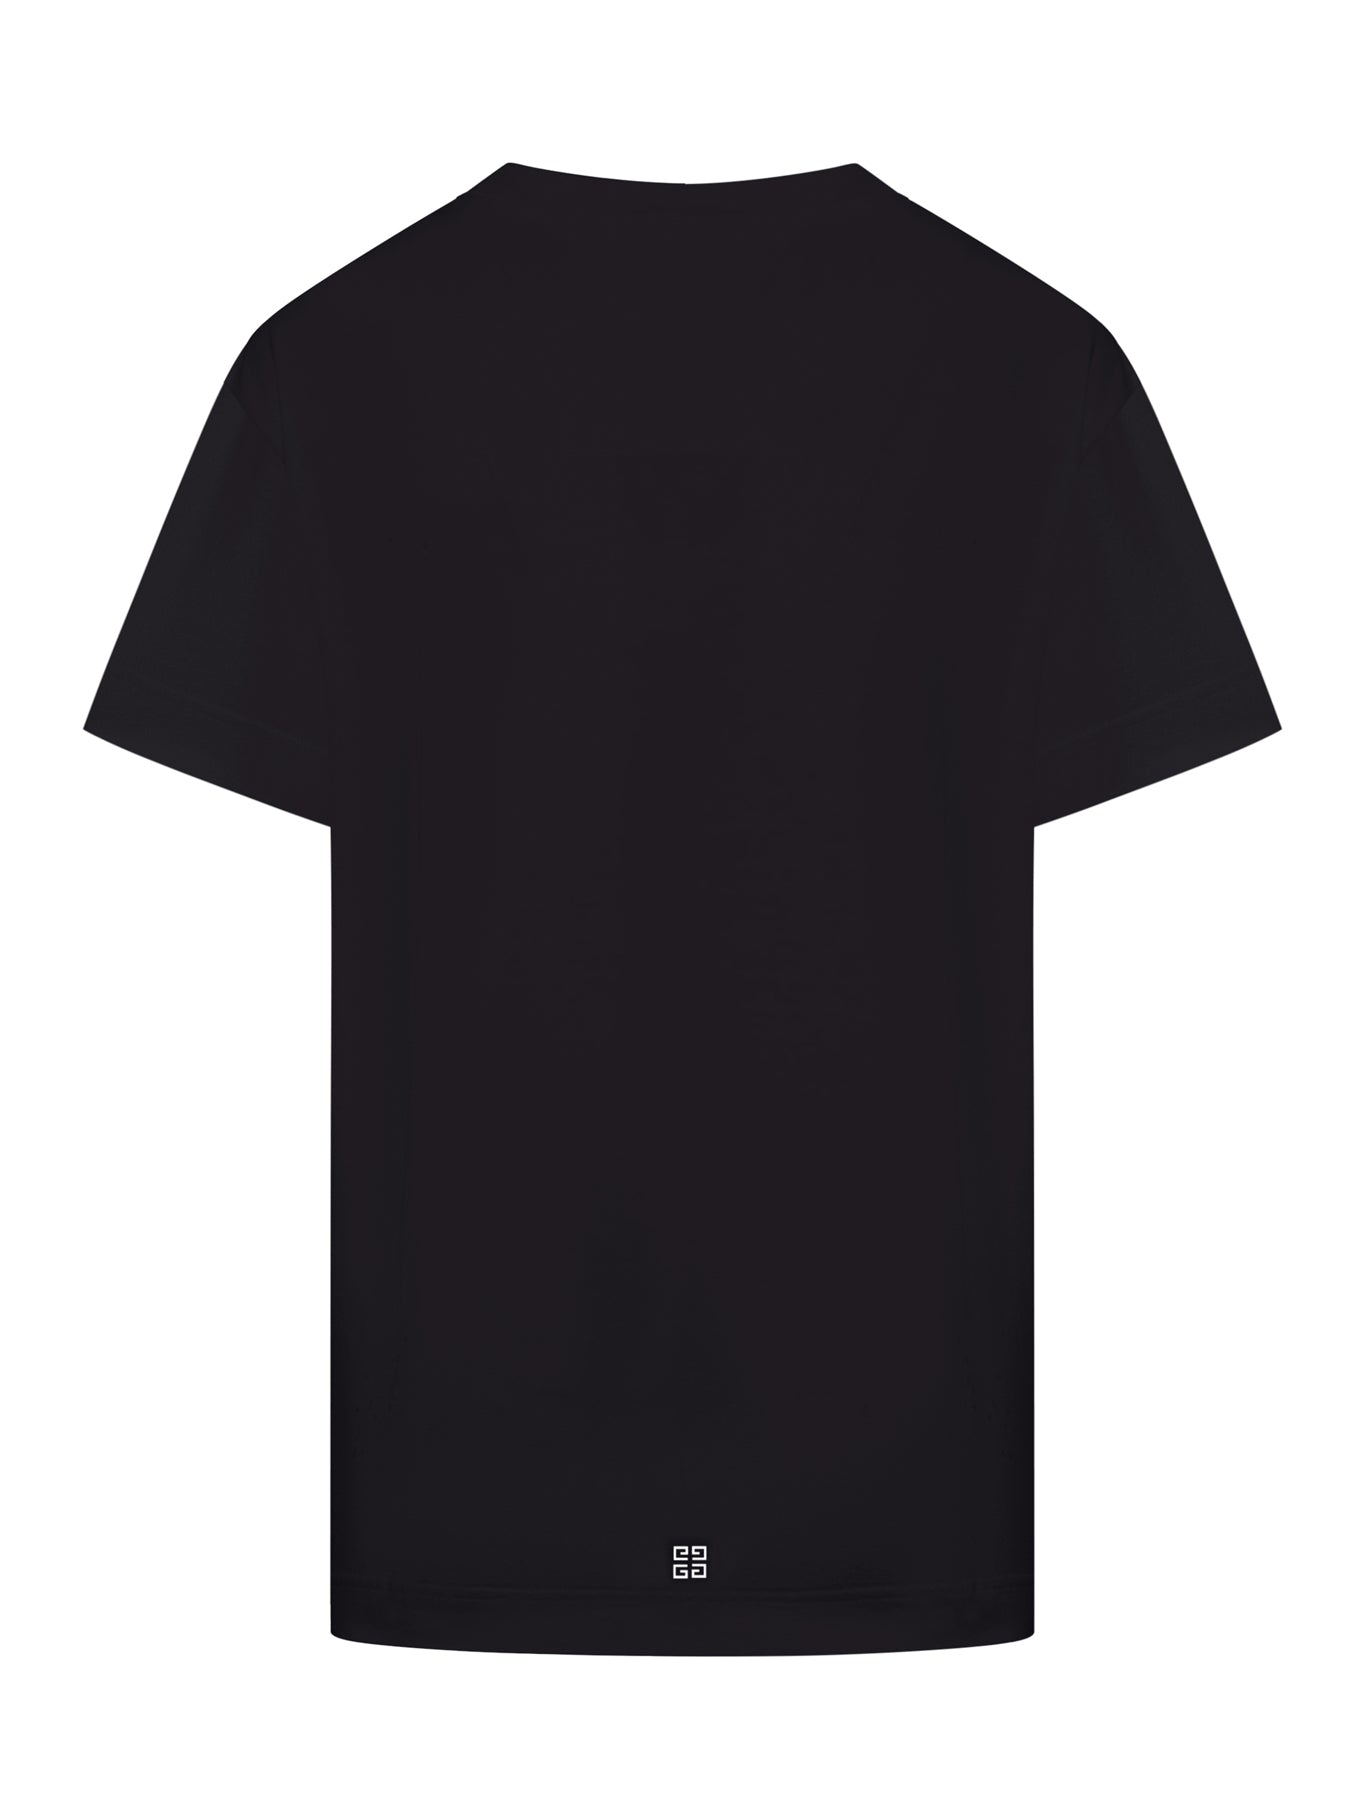 Givenchy women`s archetype t-shirt in cotton